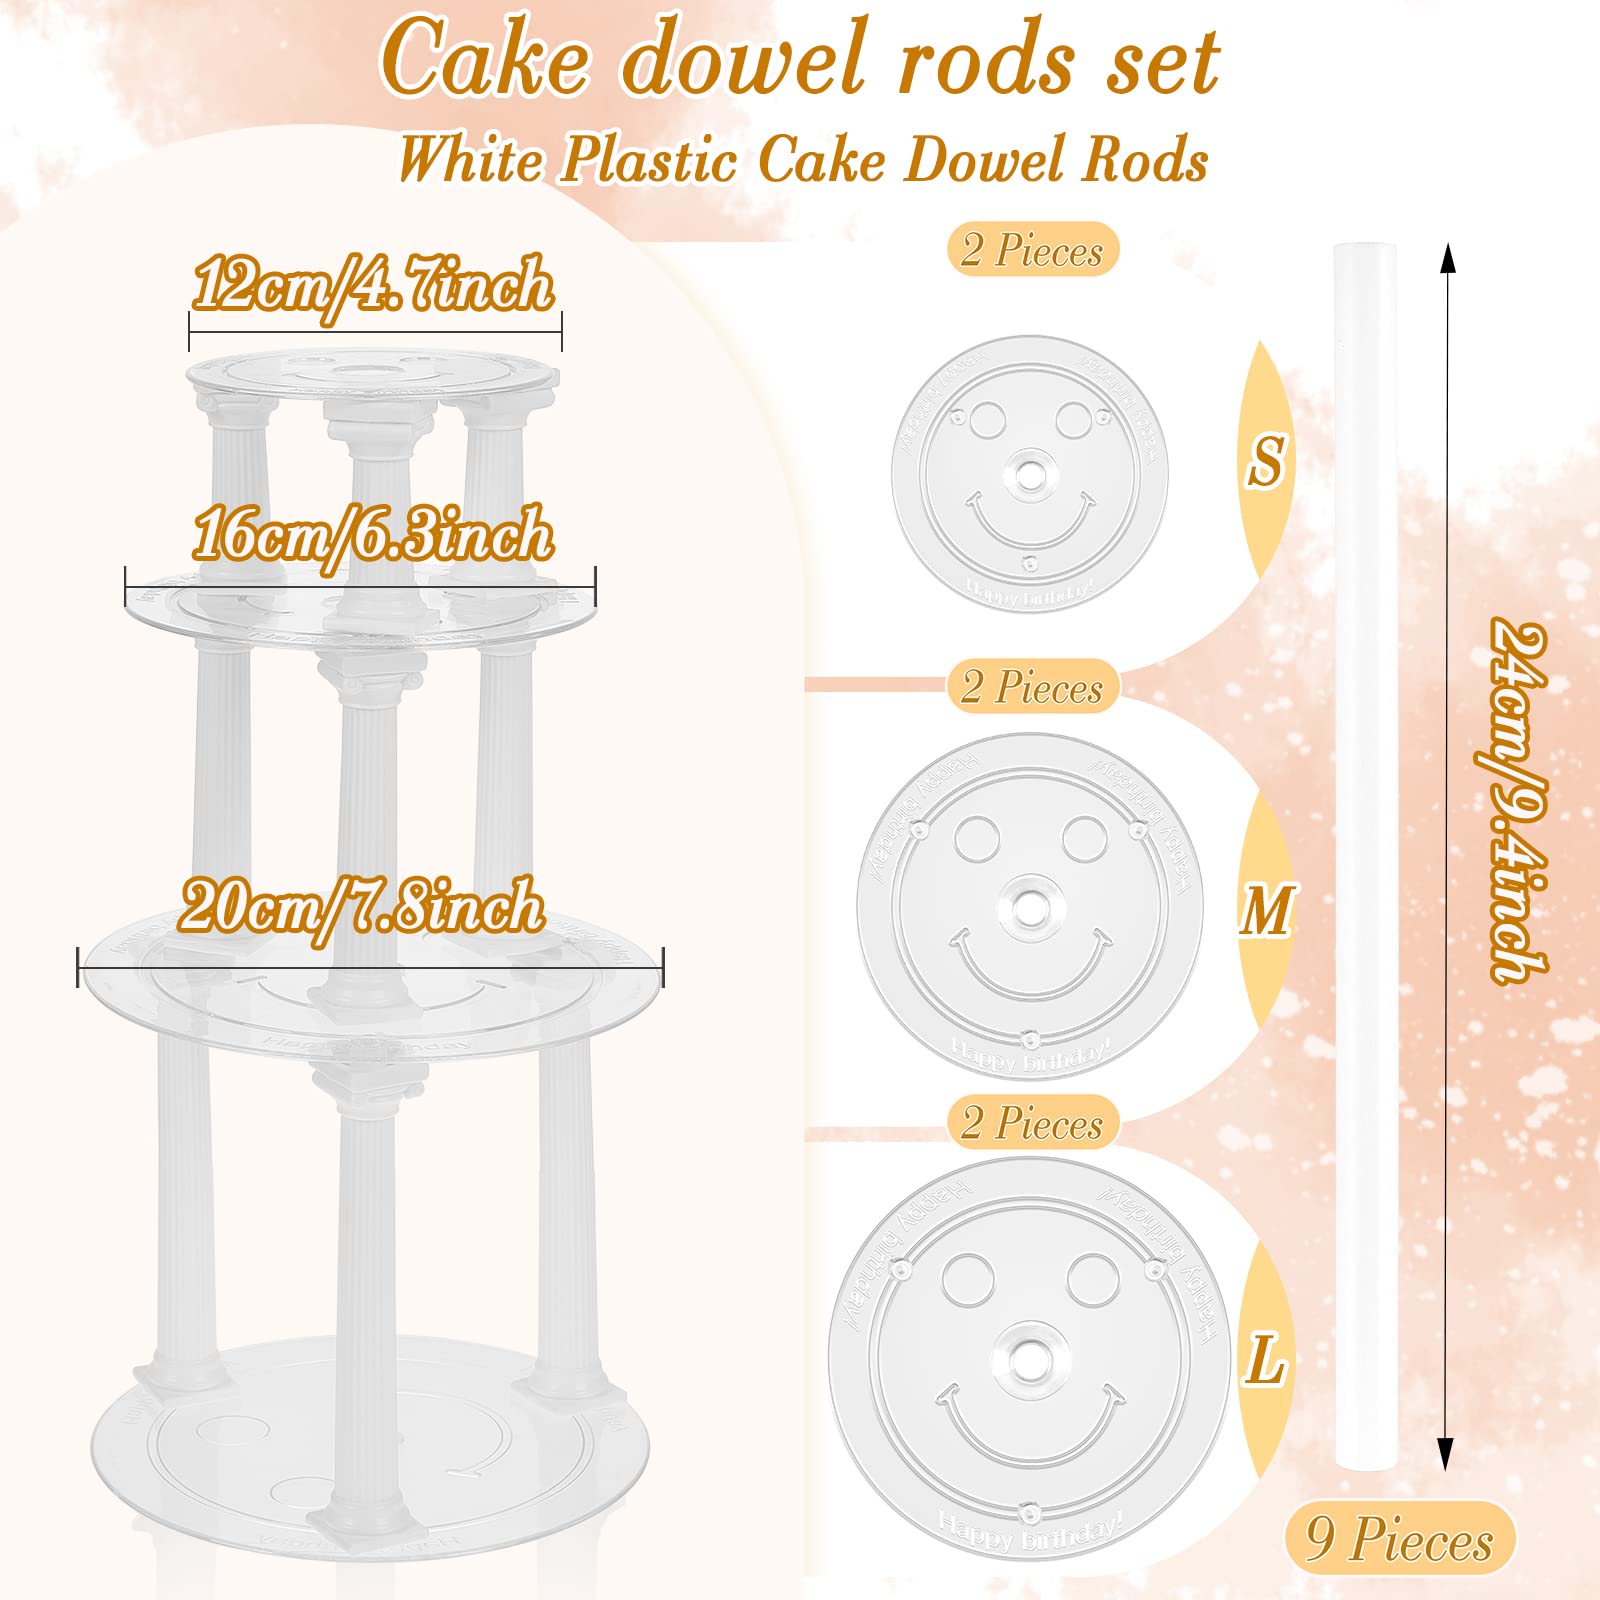 27 Pcs Cake Tier Stacking Kit Including 12 Pcs 3 Size Roman Column Cake Tiered Stands Cake Pillars 6 Pcs 12/16/20cm Cake Boards Cake Separator Plates and 9 Pcs Cake Dowel Rods for Wedding Cakes